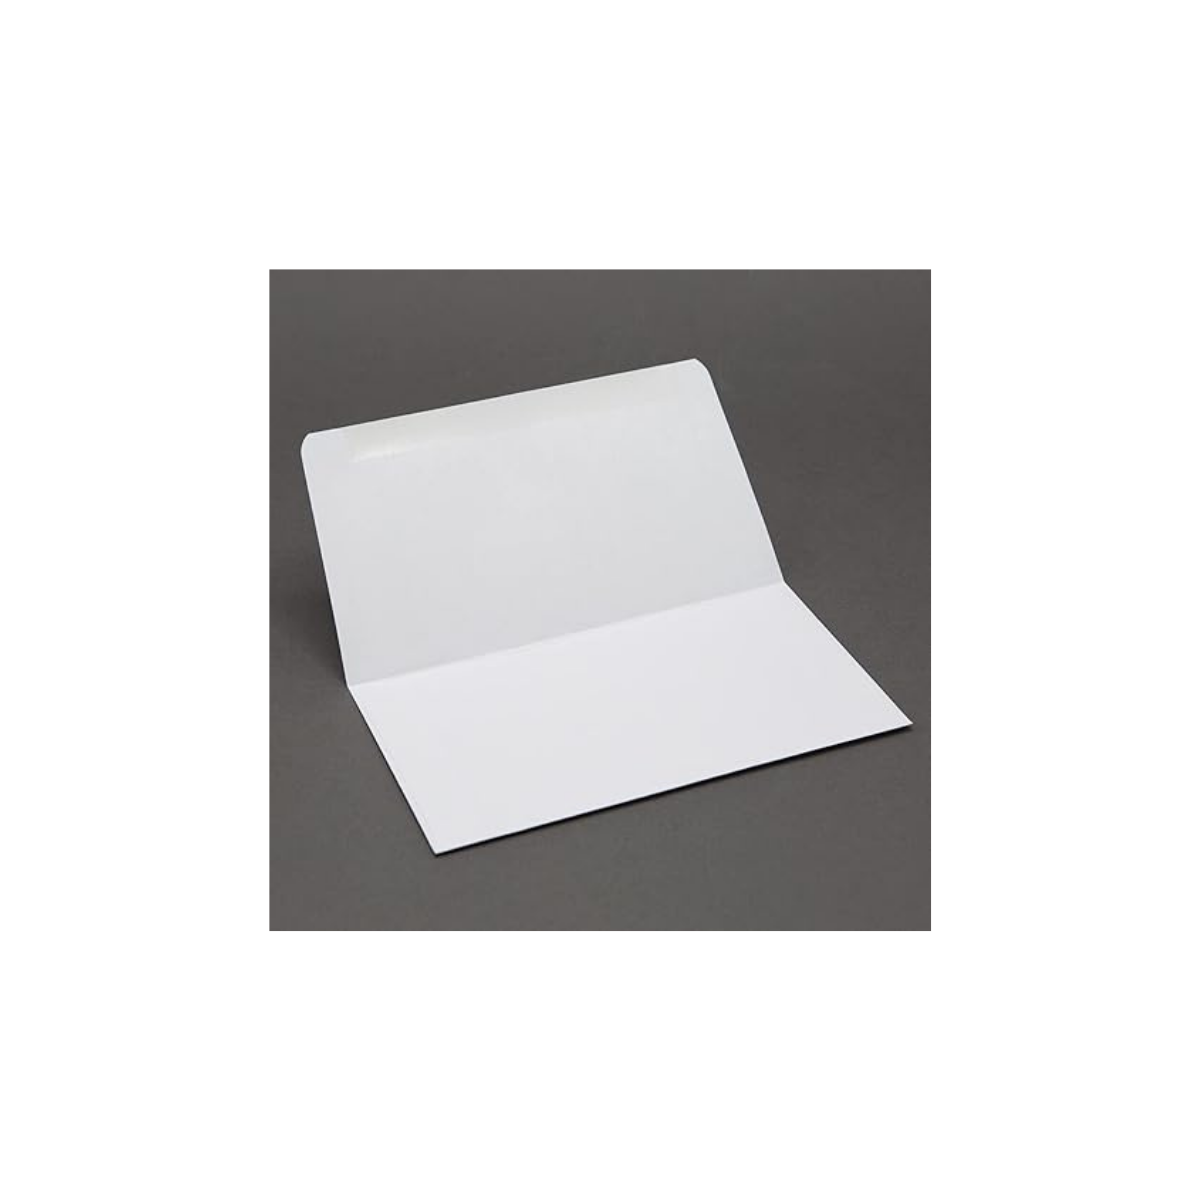 #9 Remittance Envelopes (3 7/8" x 8 7/8" Closed) in 60 lb. White 1600 Bulk Pack, for Mailing Checks, Donations, Invoices, Business Letterhead, and Direct Mail, (White)